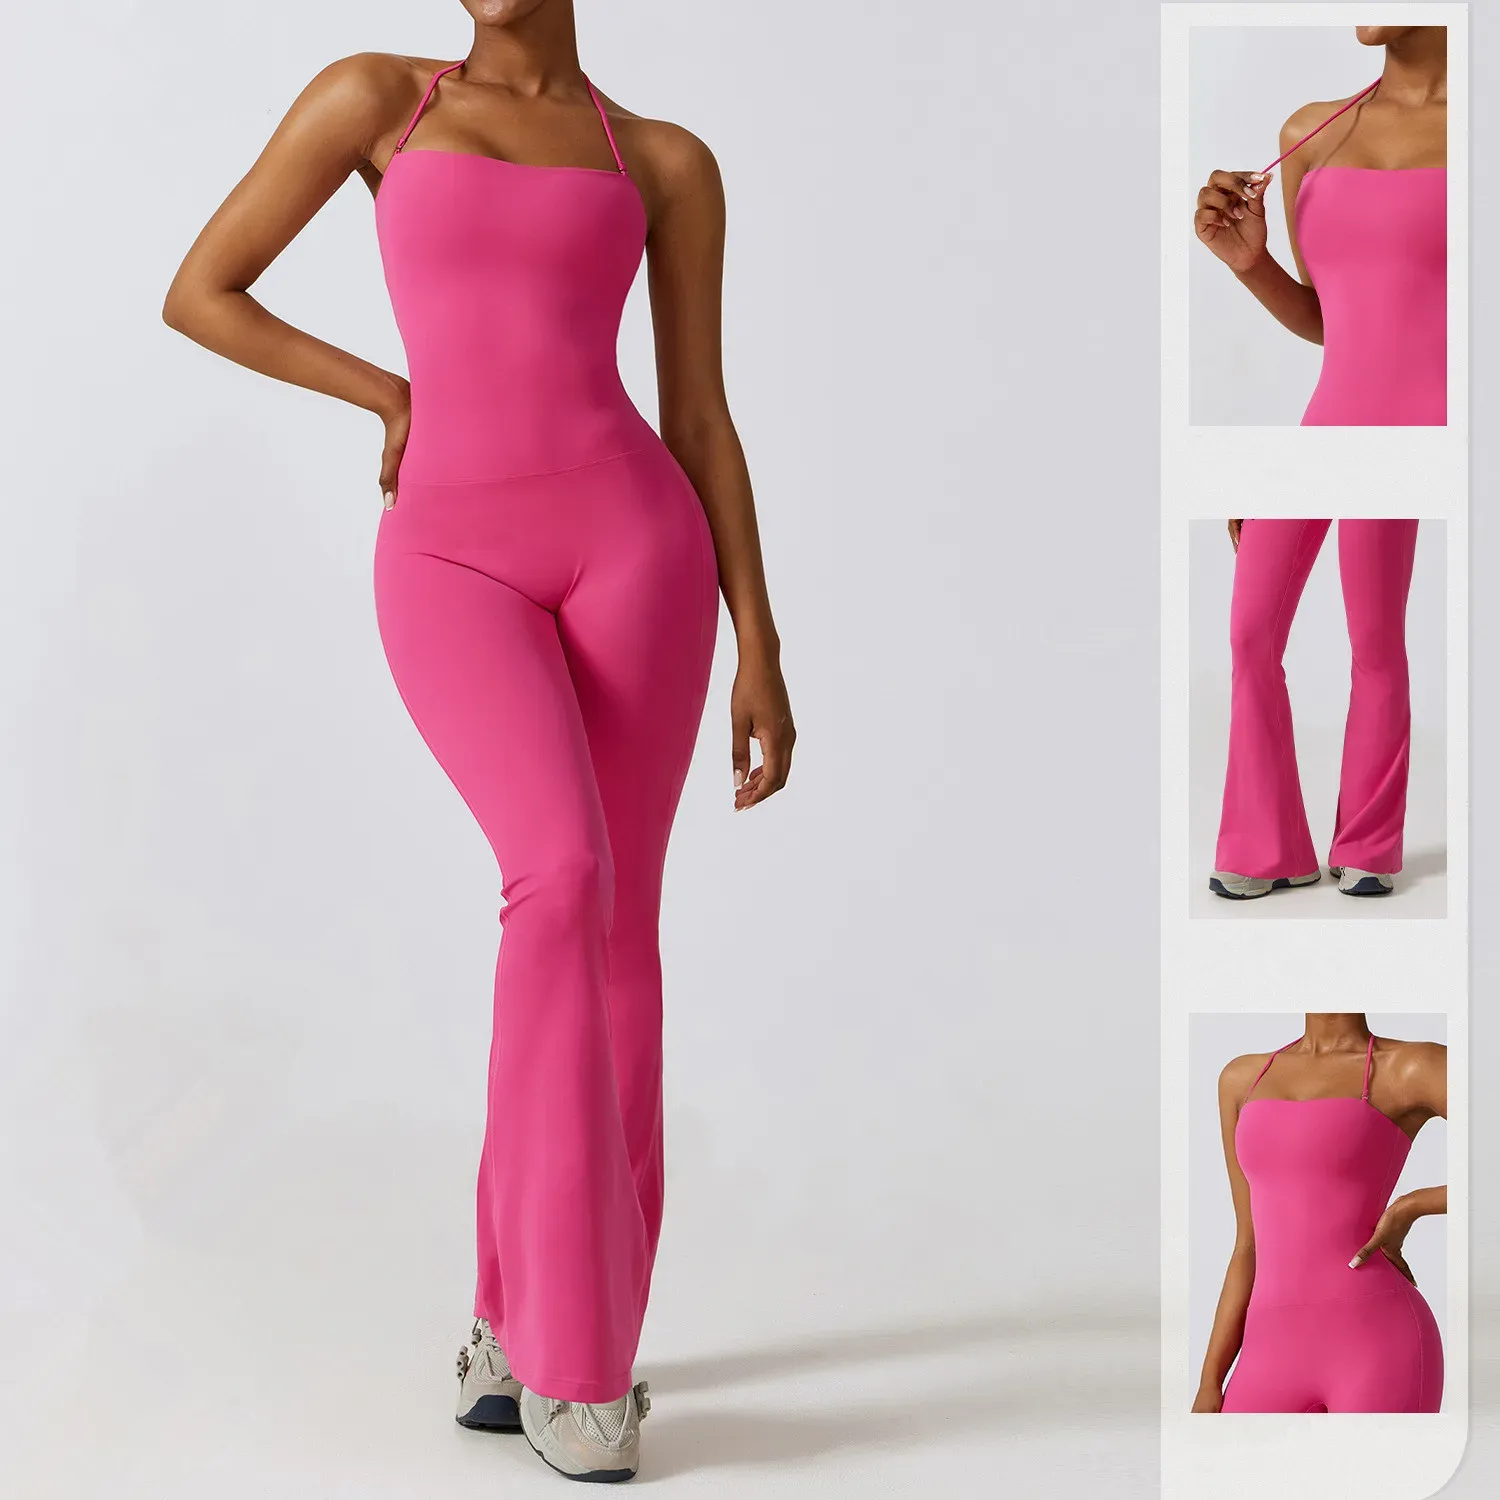 ll8393 Womens lu Bodysuit Jumpsuit Yoga Outfits Sleeveless Close-fitting Dance One Piece Jumpsuit Long Pants Fast Dry Breathable Bell-bottoms Pants